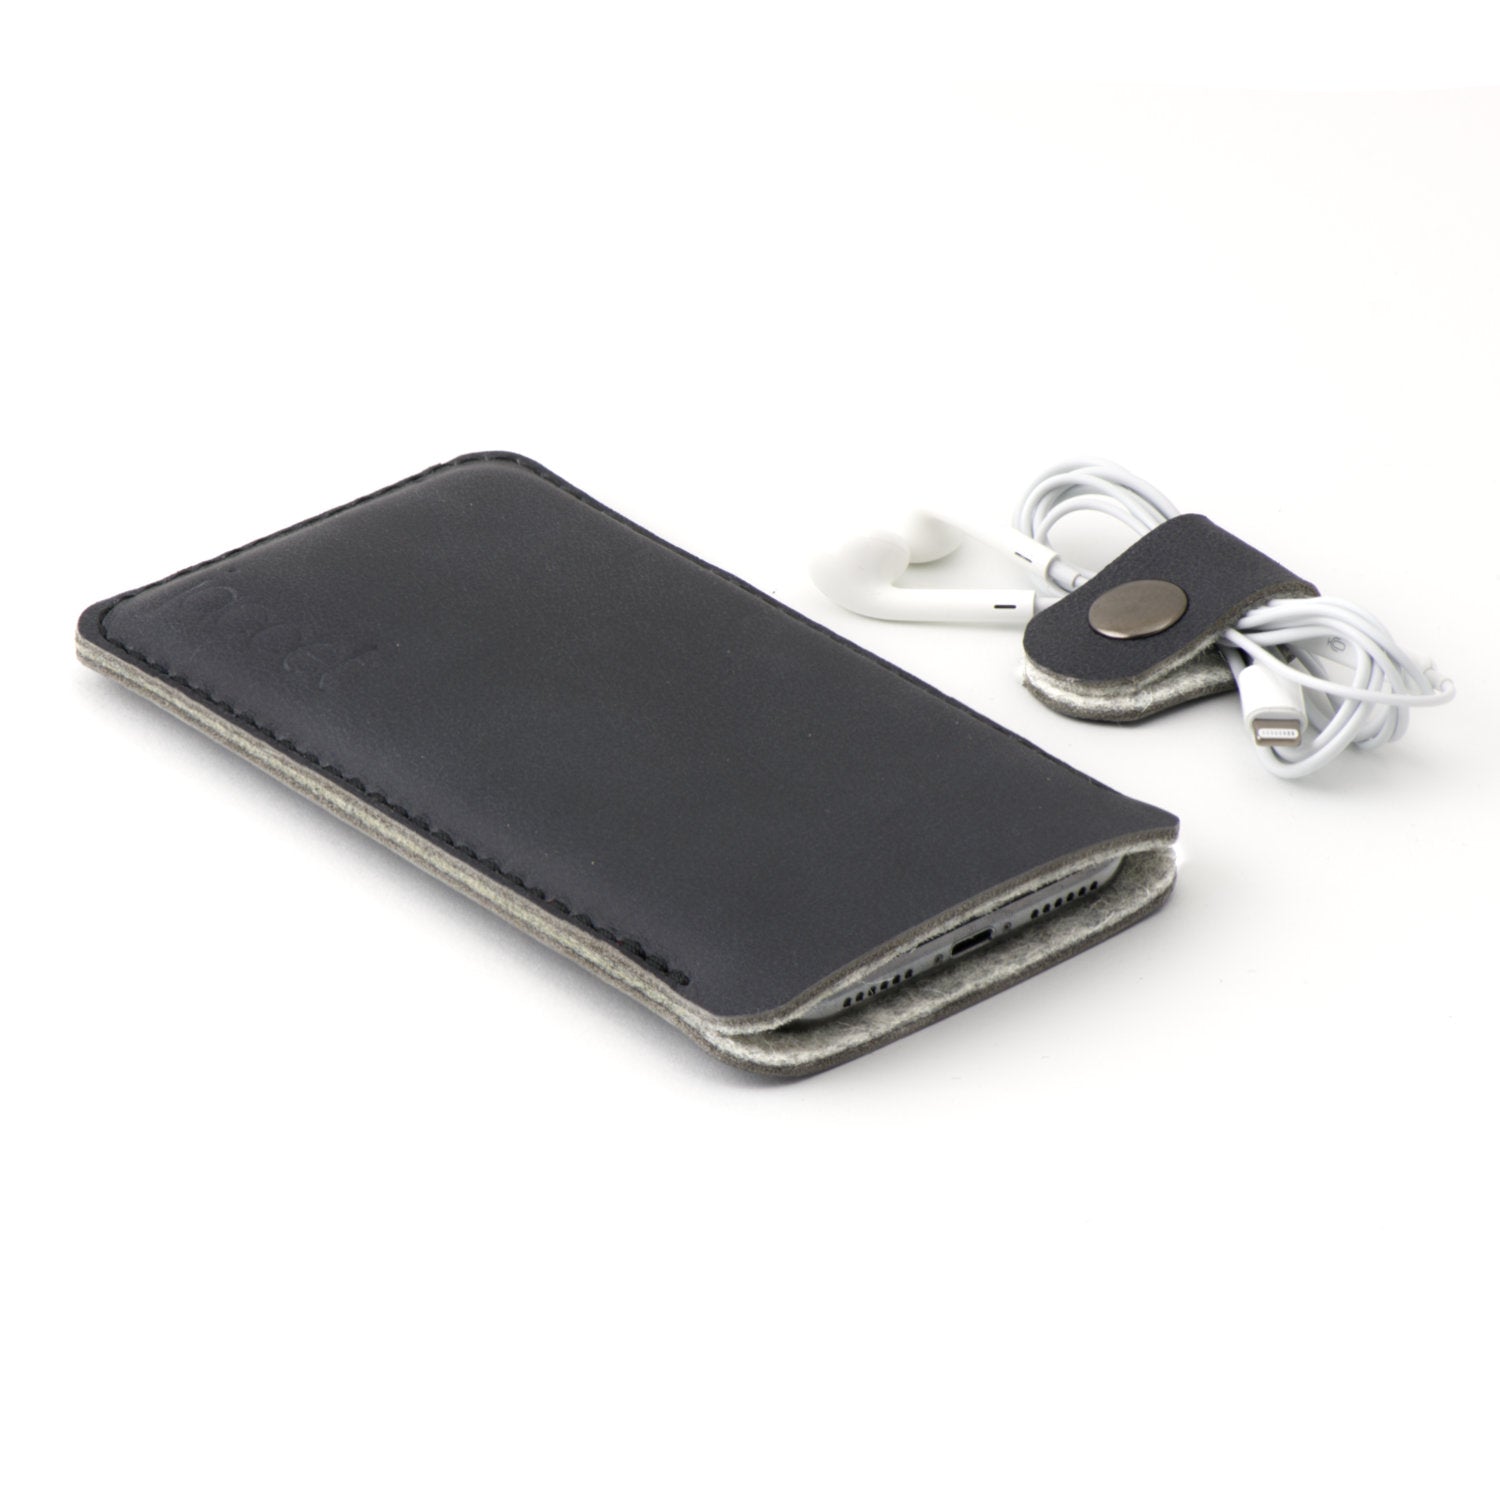 JACCET leather OnePlus sleeve - anthracite/black leather with grey wool felt. 100% Handmade